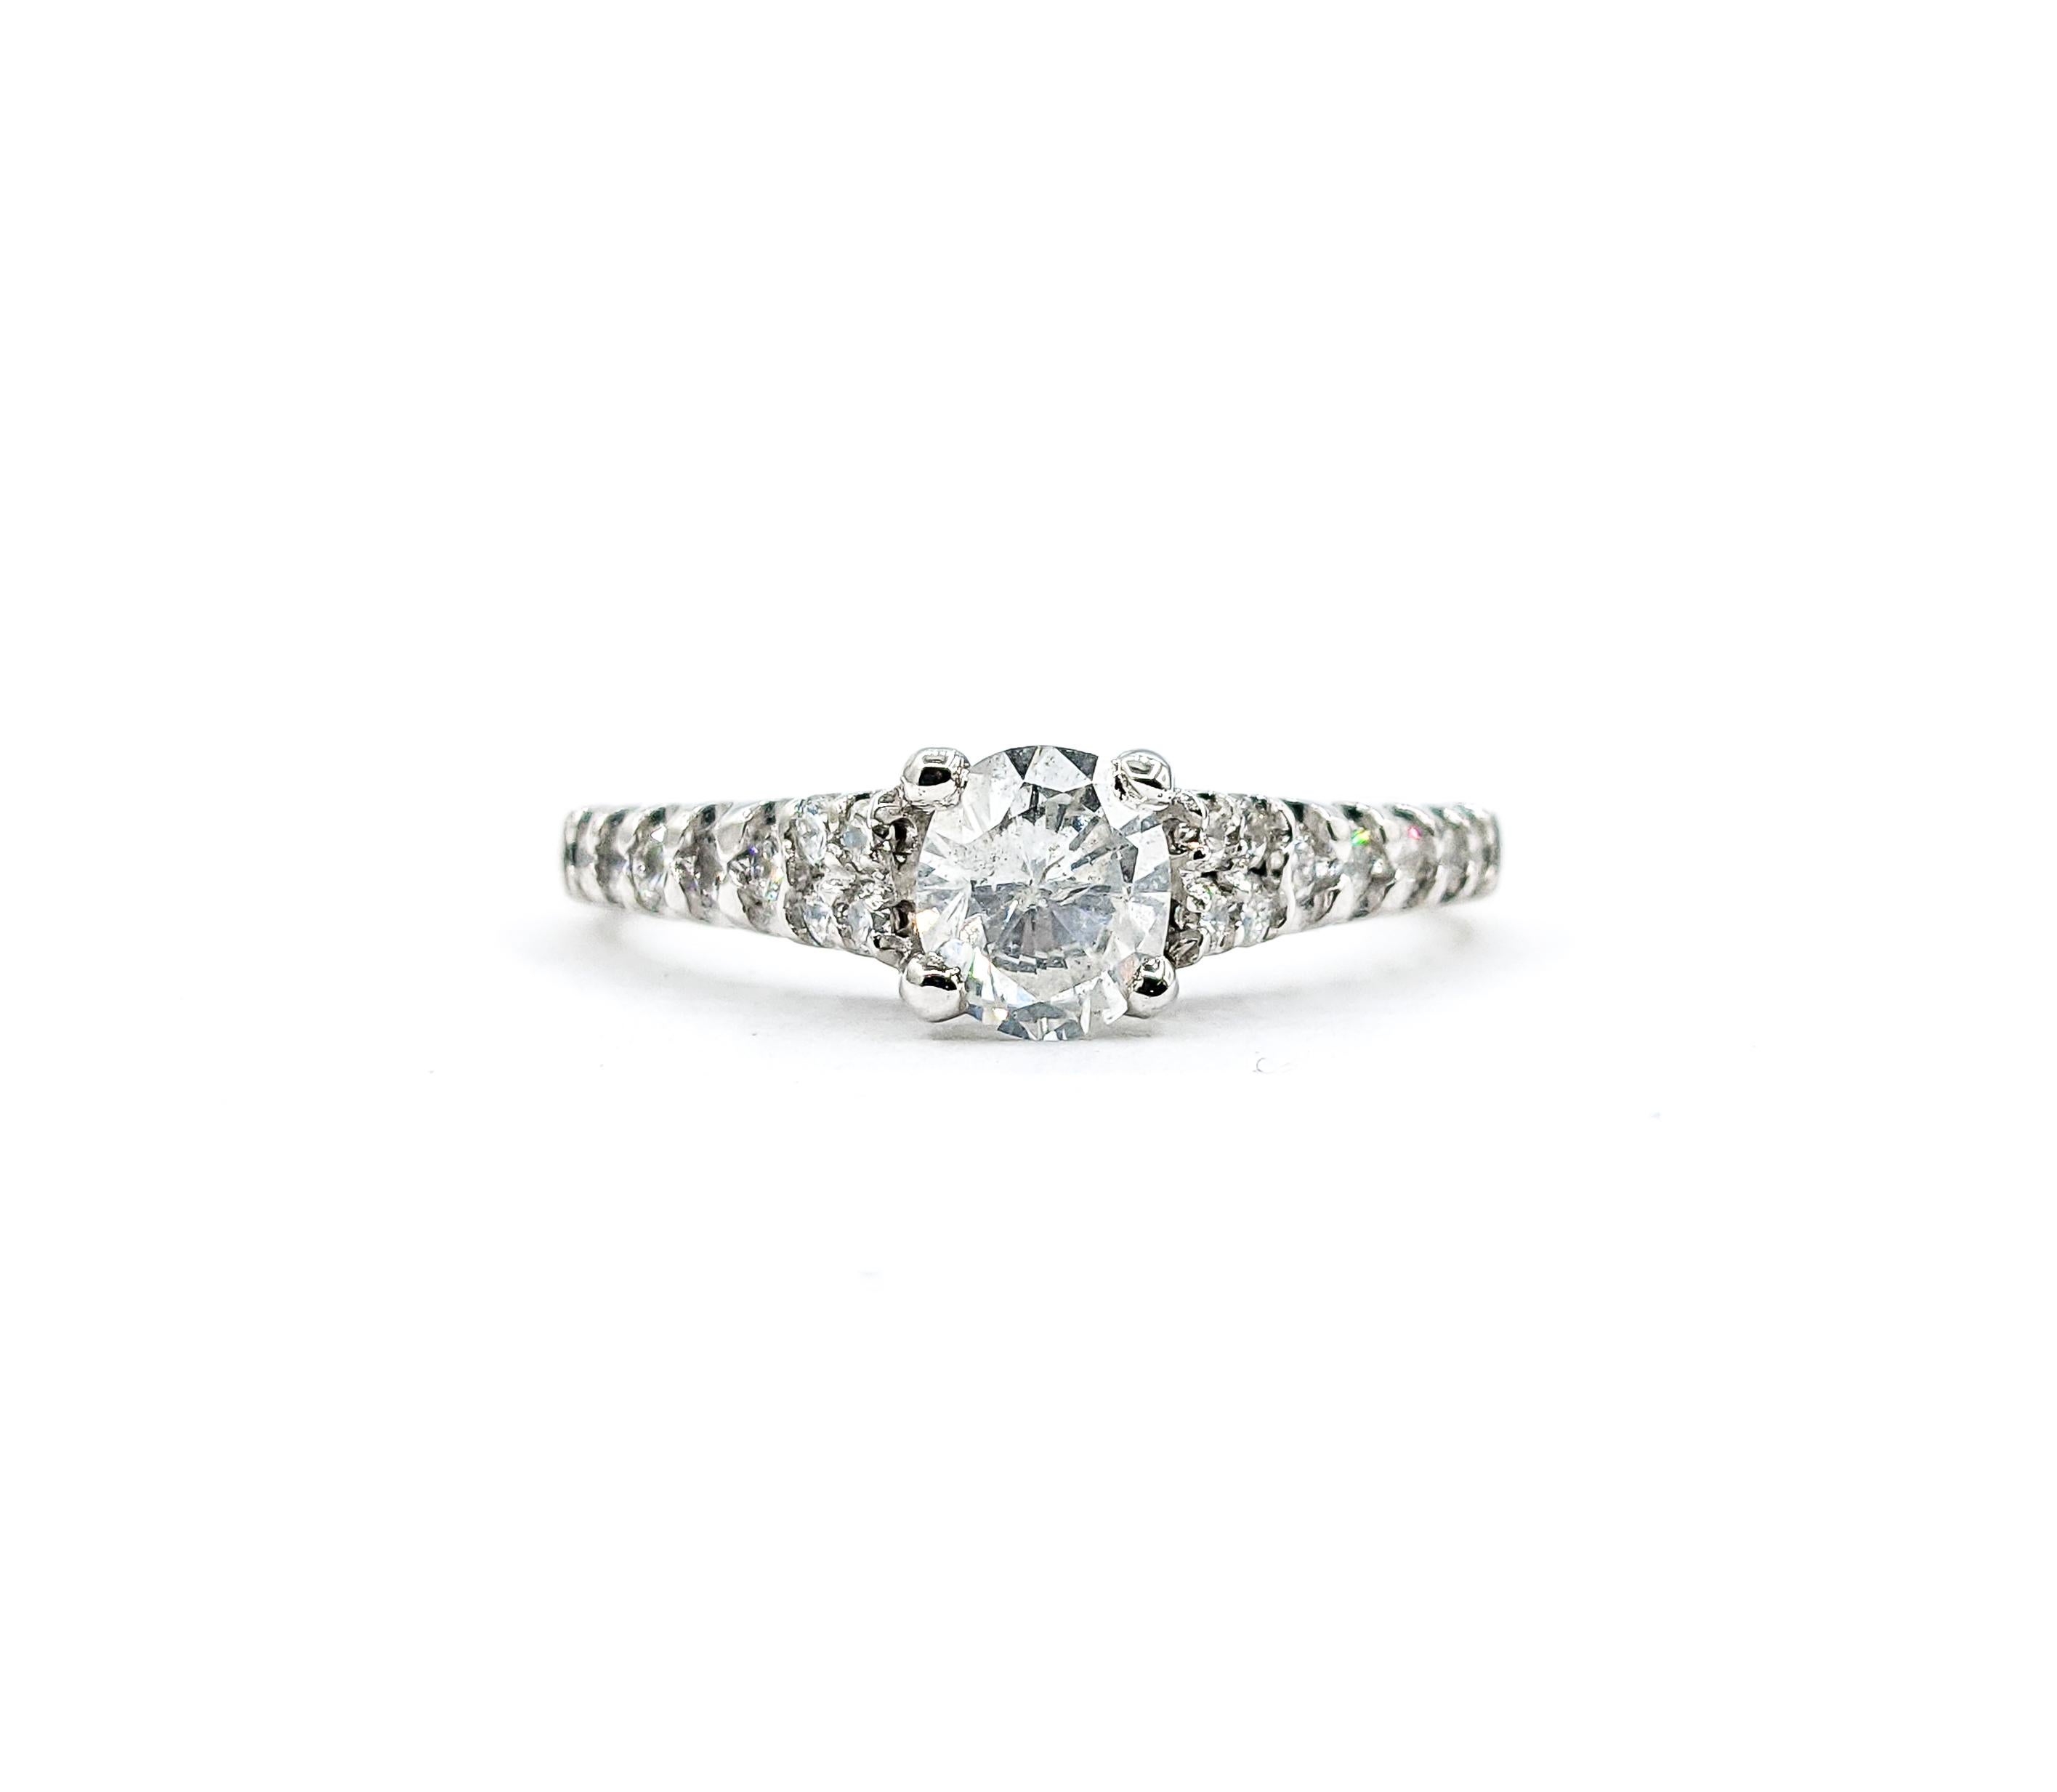 70ct Oval Diamond Centerpiece & Diamond Ring In White Gold

Embrace sophistication with this stunning ring, crafted in lustrous 14kt white gold and showcasing a .70ct oval diamond that glistens with I clarity and a near colorless white radiance.